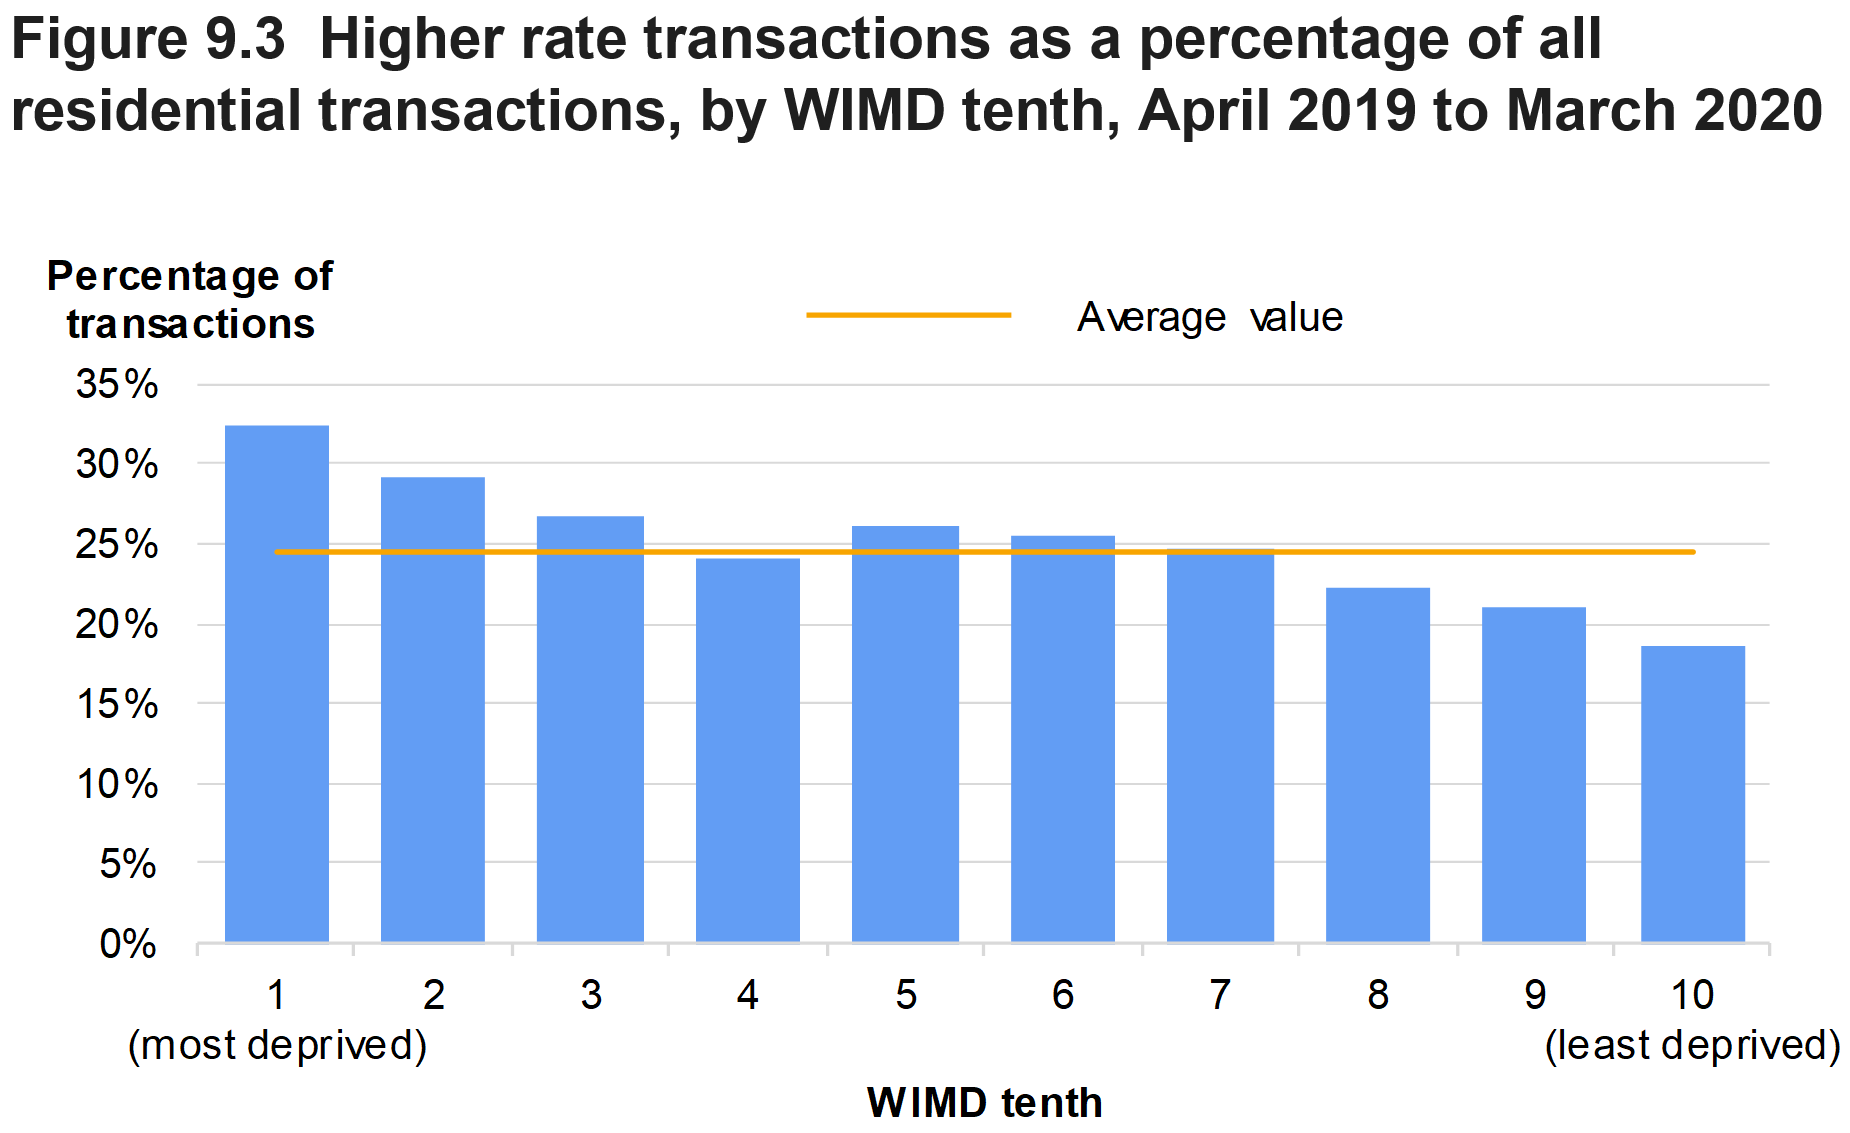 Figure 9.3 shows higher rate transactions as a percentage of all residential transactions, by WIMD tenth, for April 2019 to March 2020. An average value over all WIMD tenths is also presented.